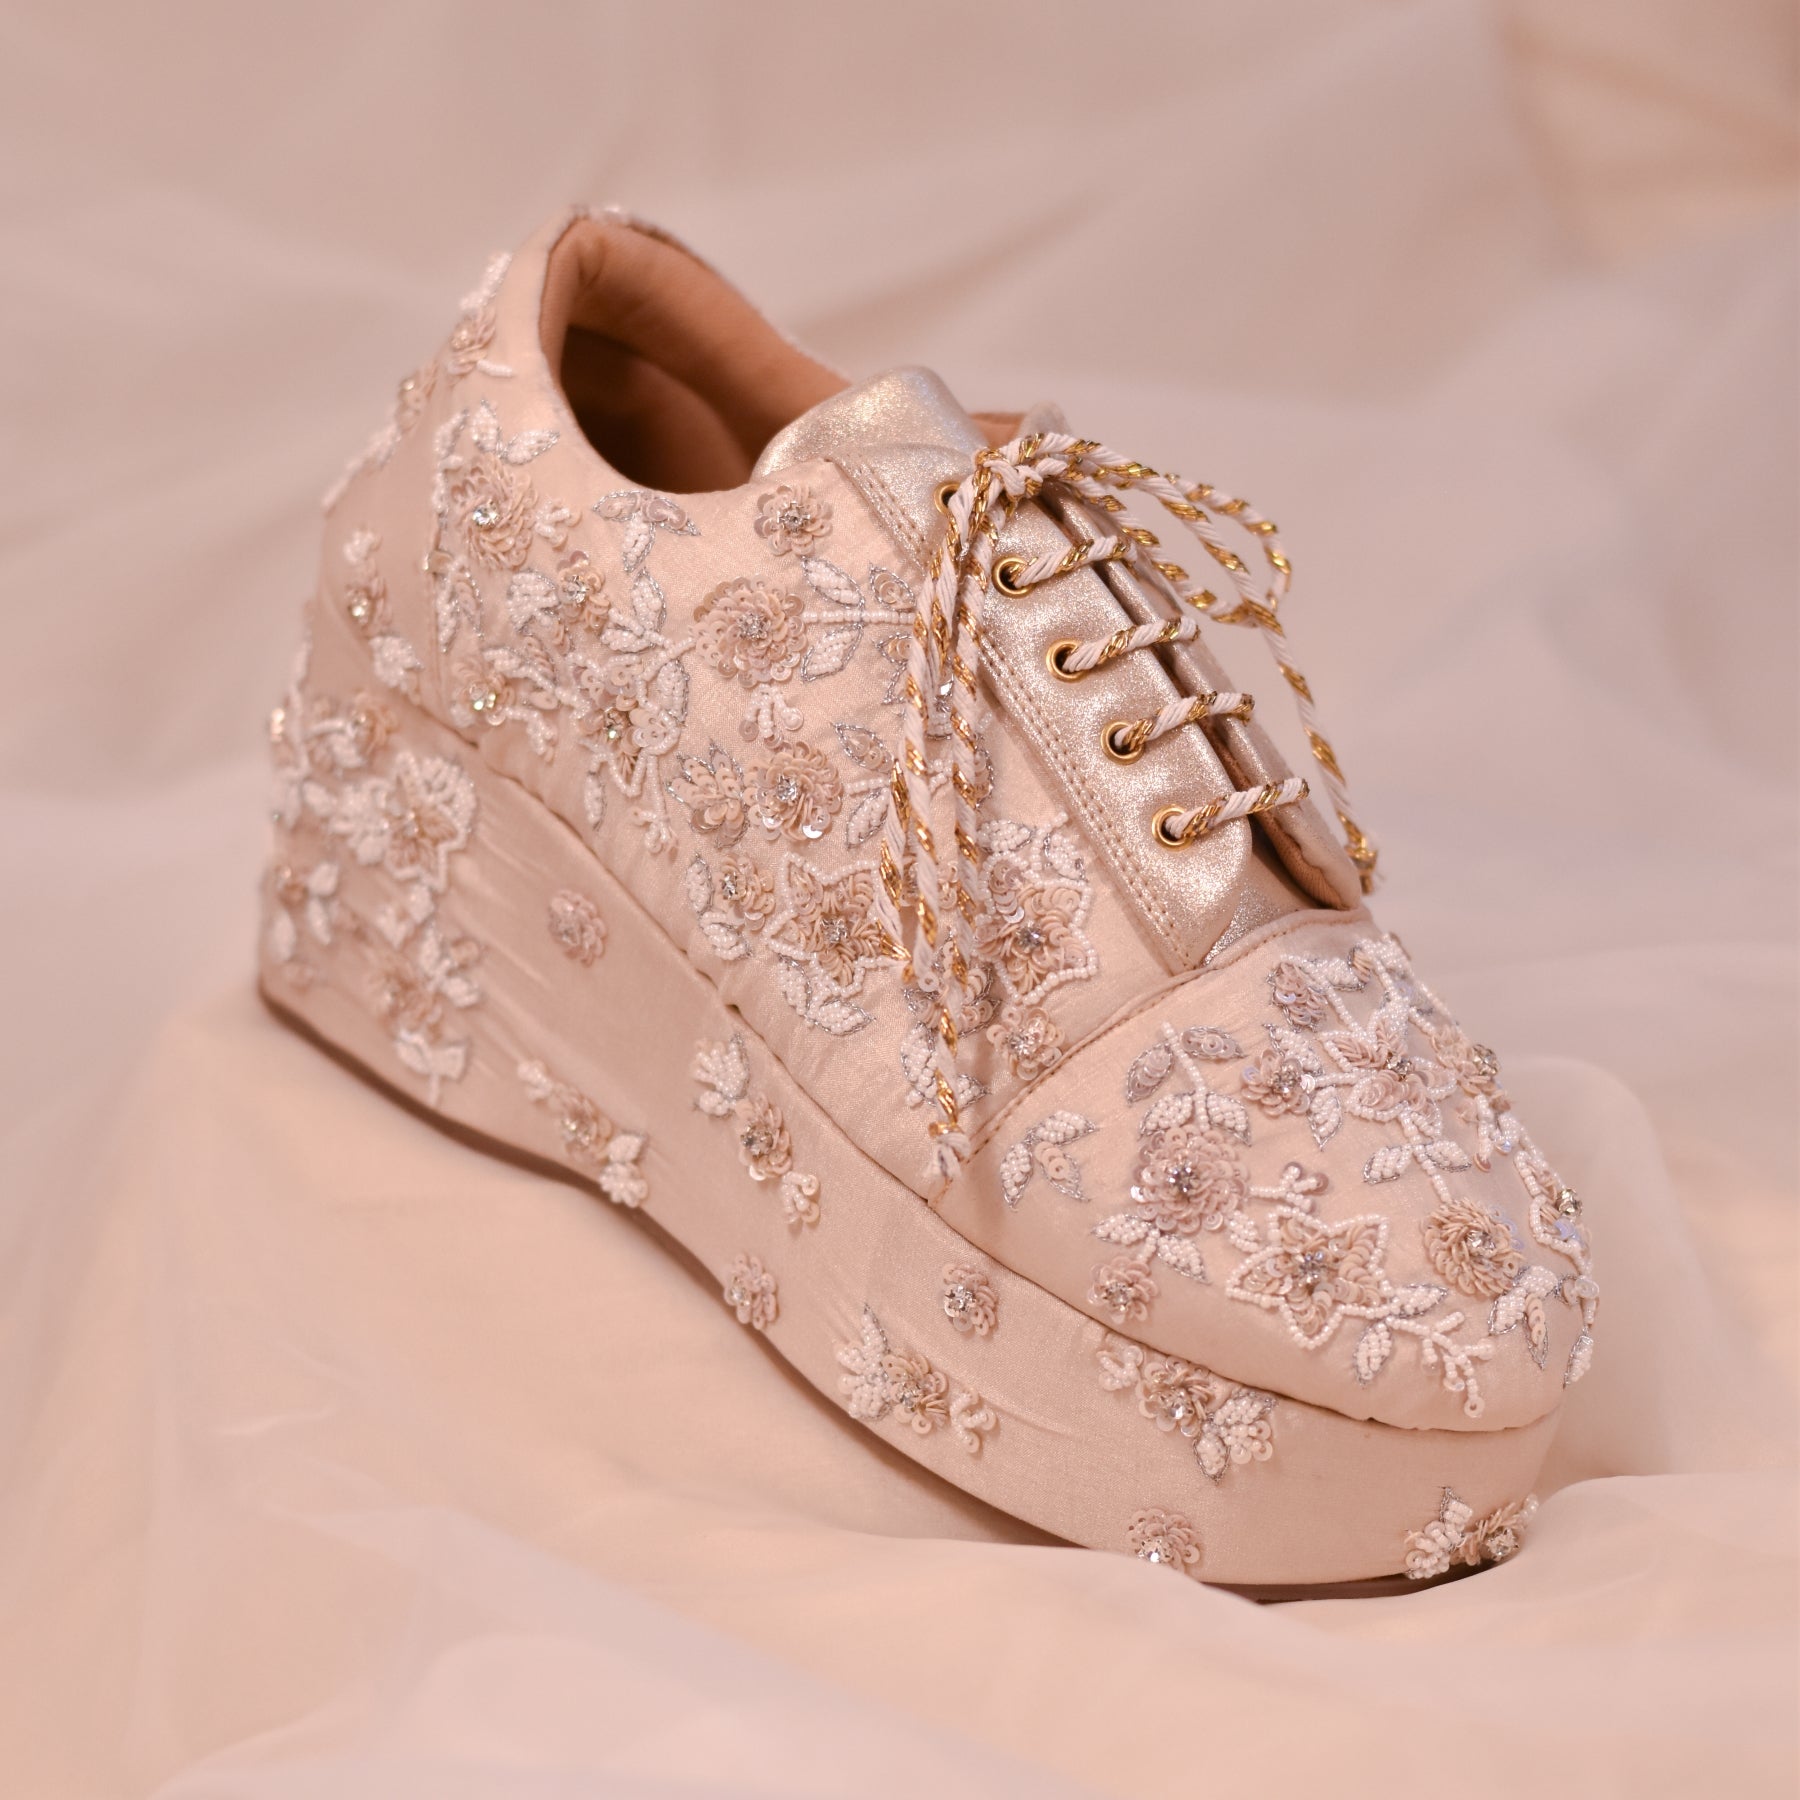 Comfortable sneaker shoes for attending Indian Wedding functions